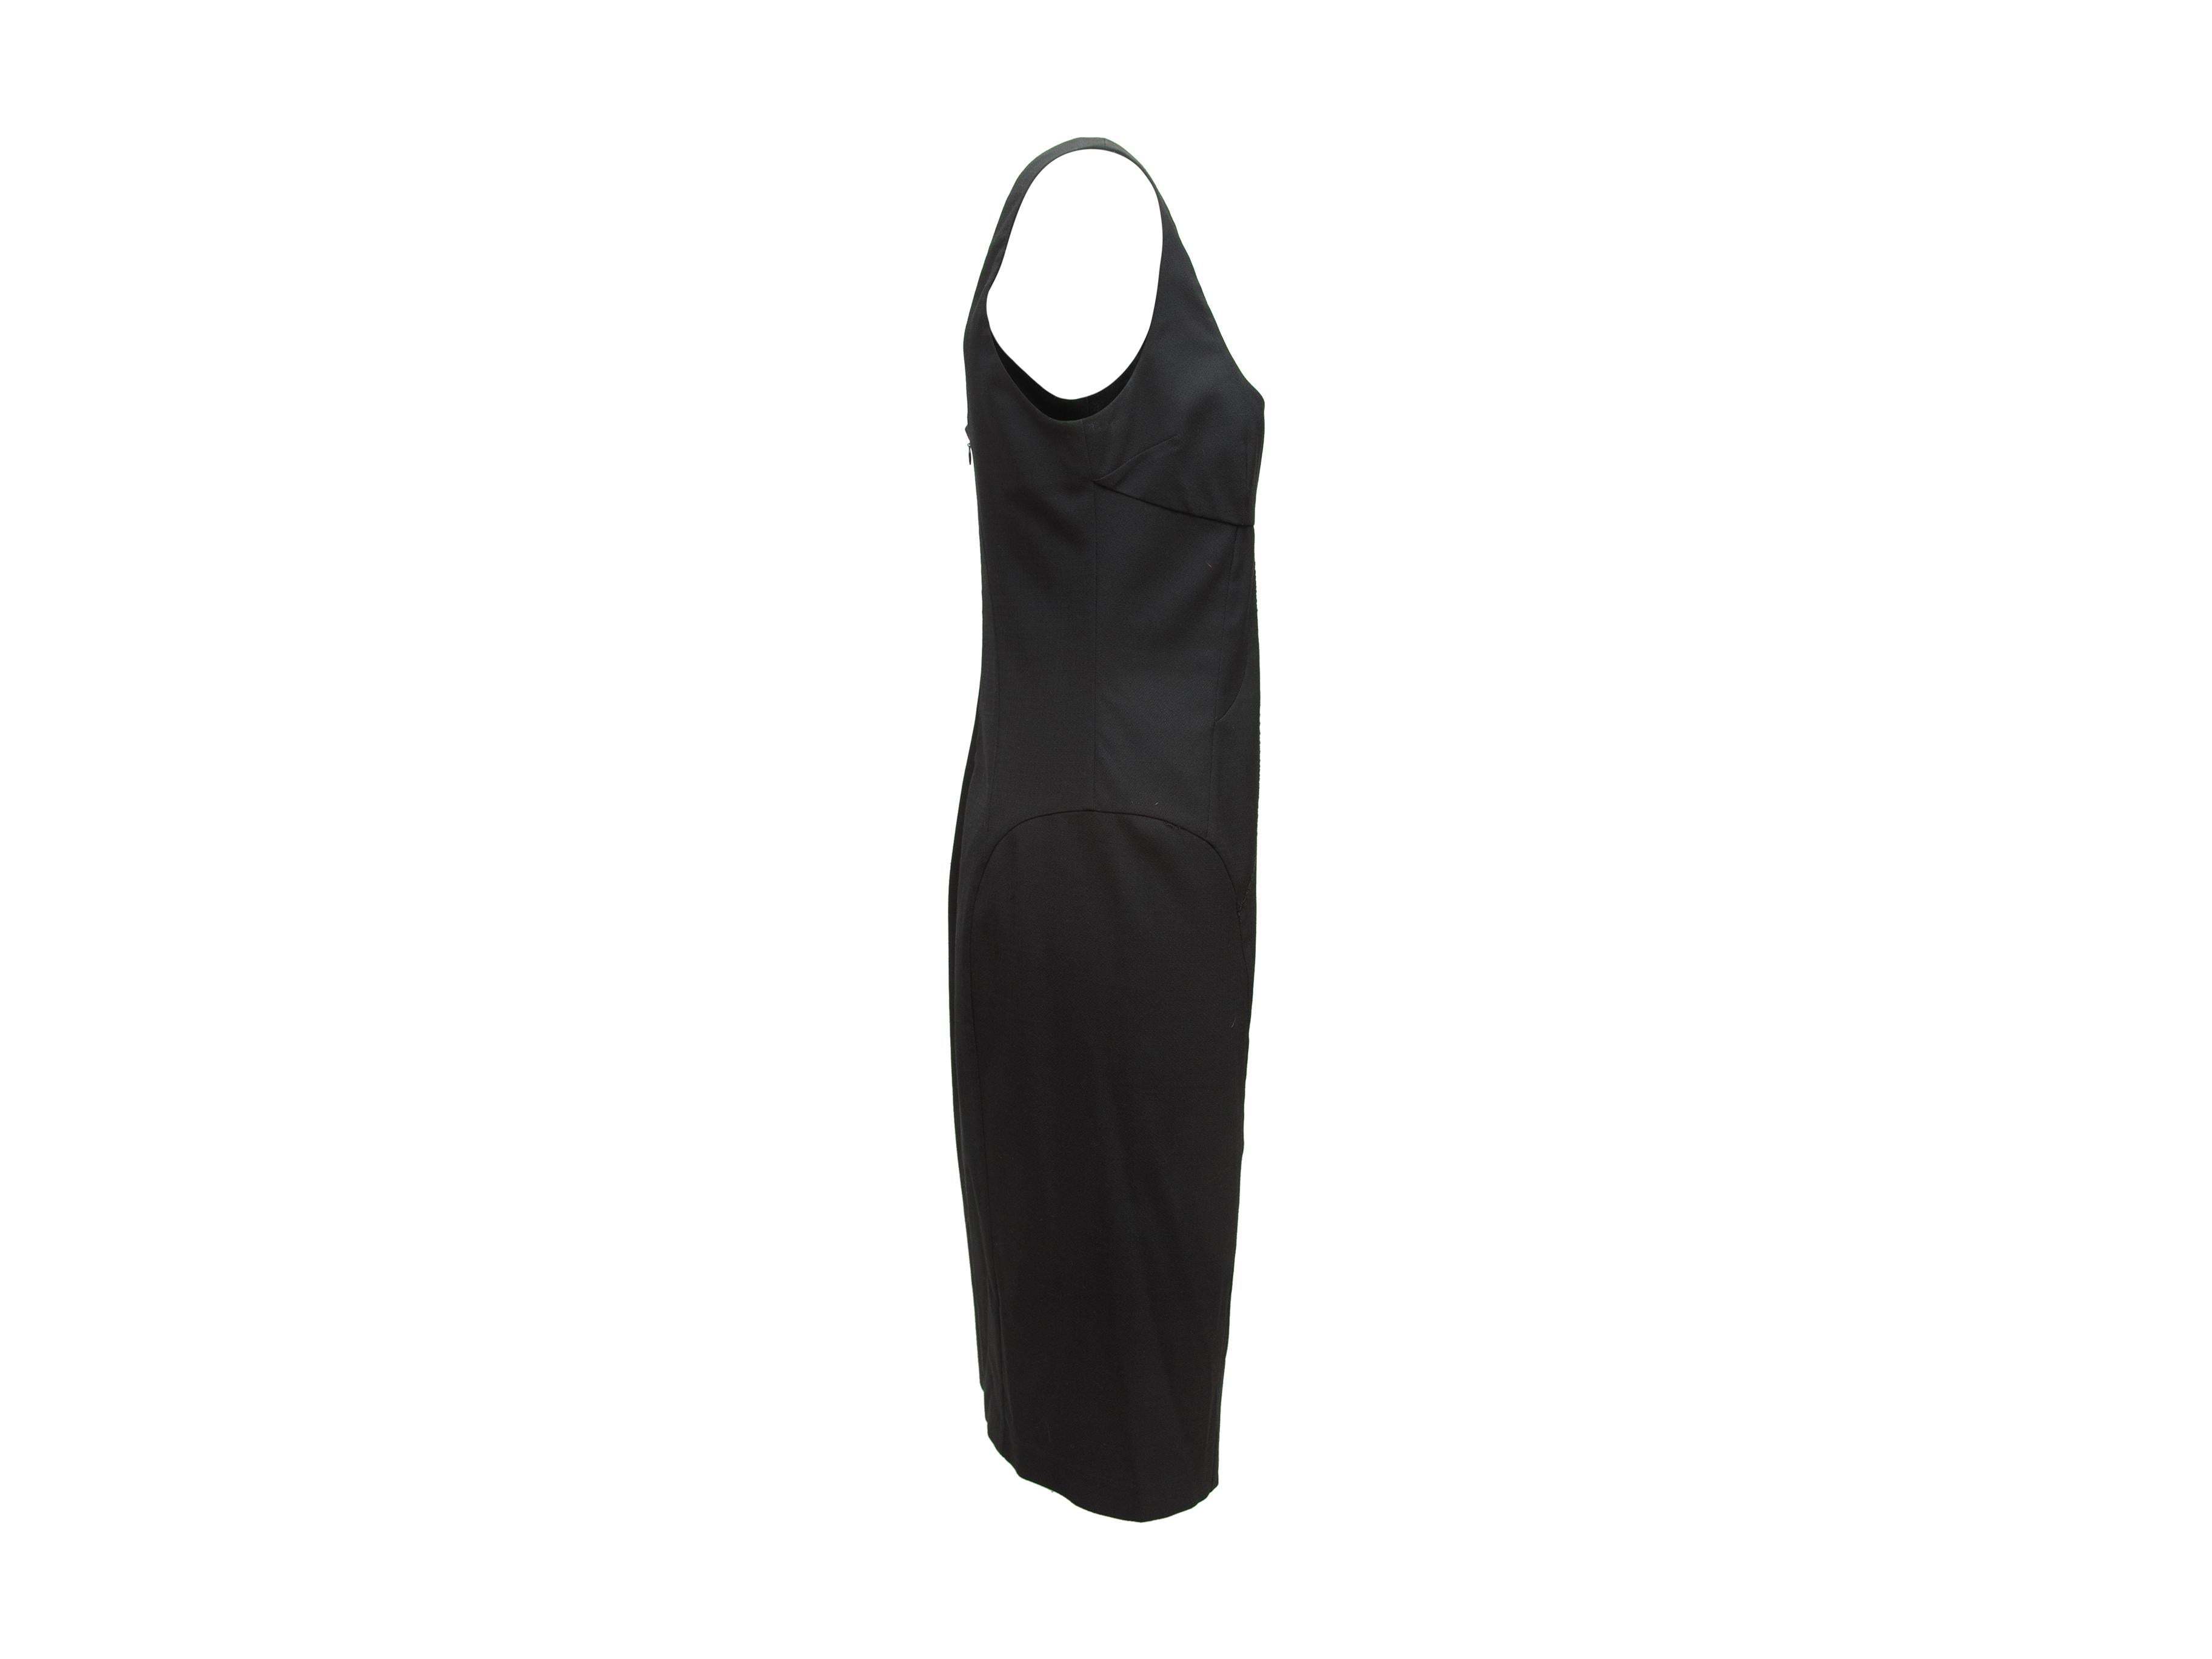 Product details: Black sleeveless fitted dress by D&G. Scoop neck. Zip closure at back. Designer size 44. 35